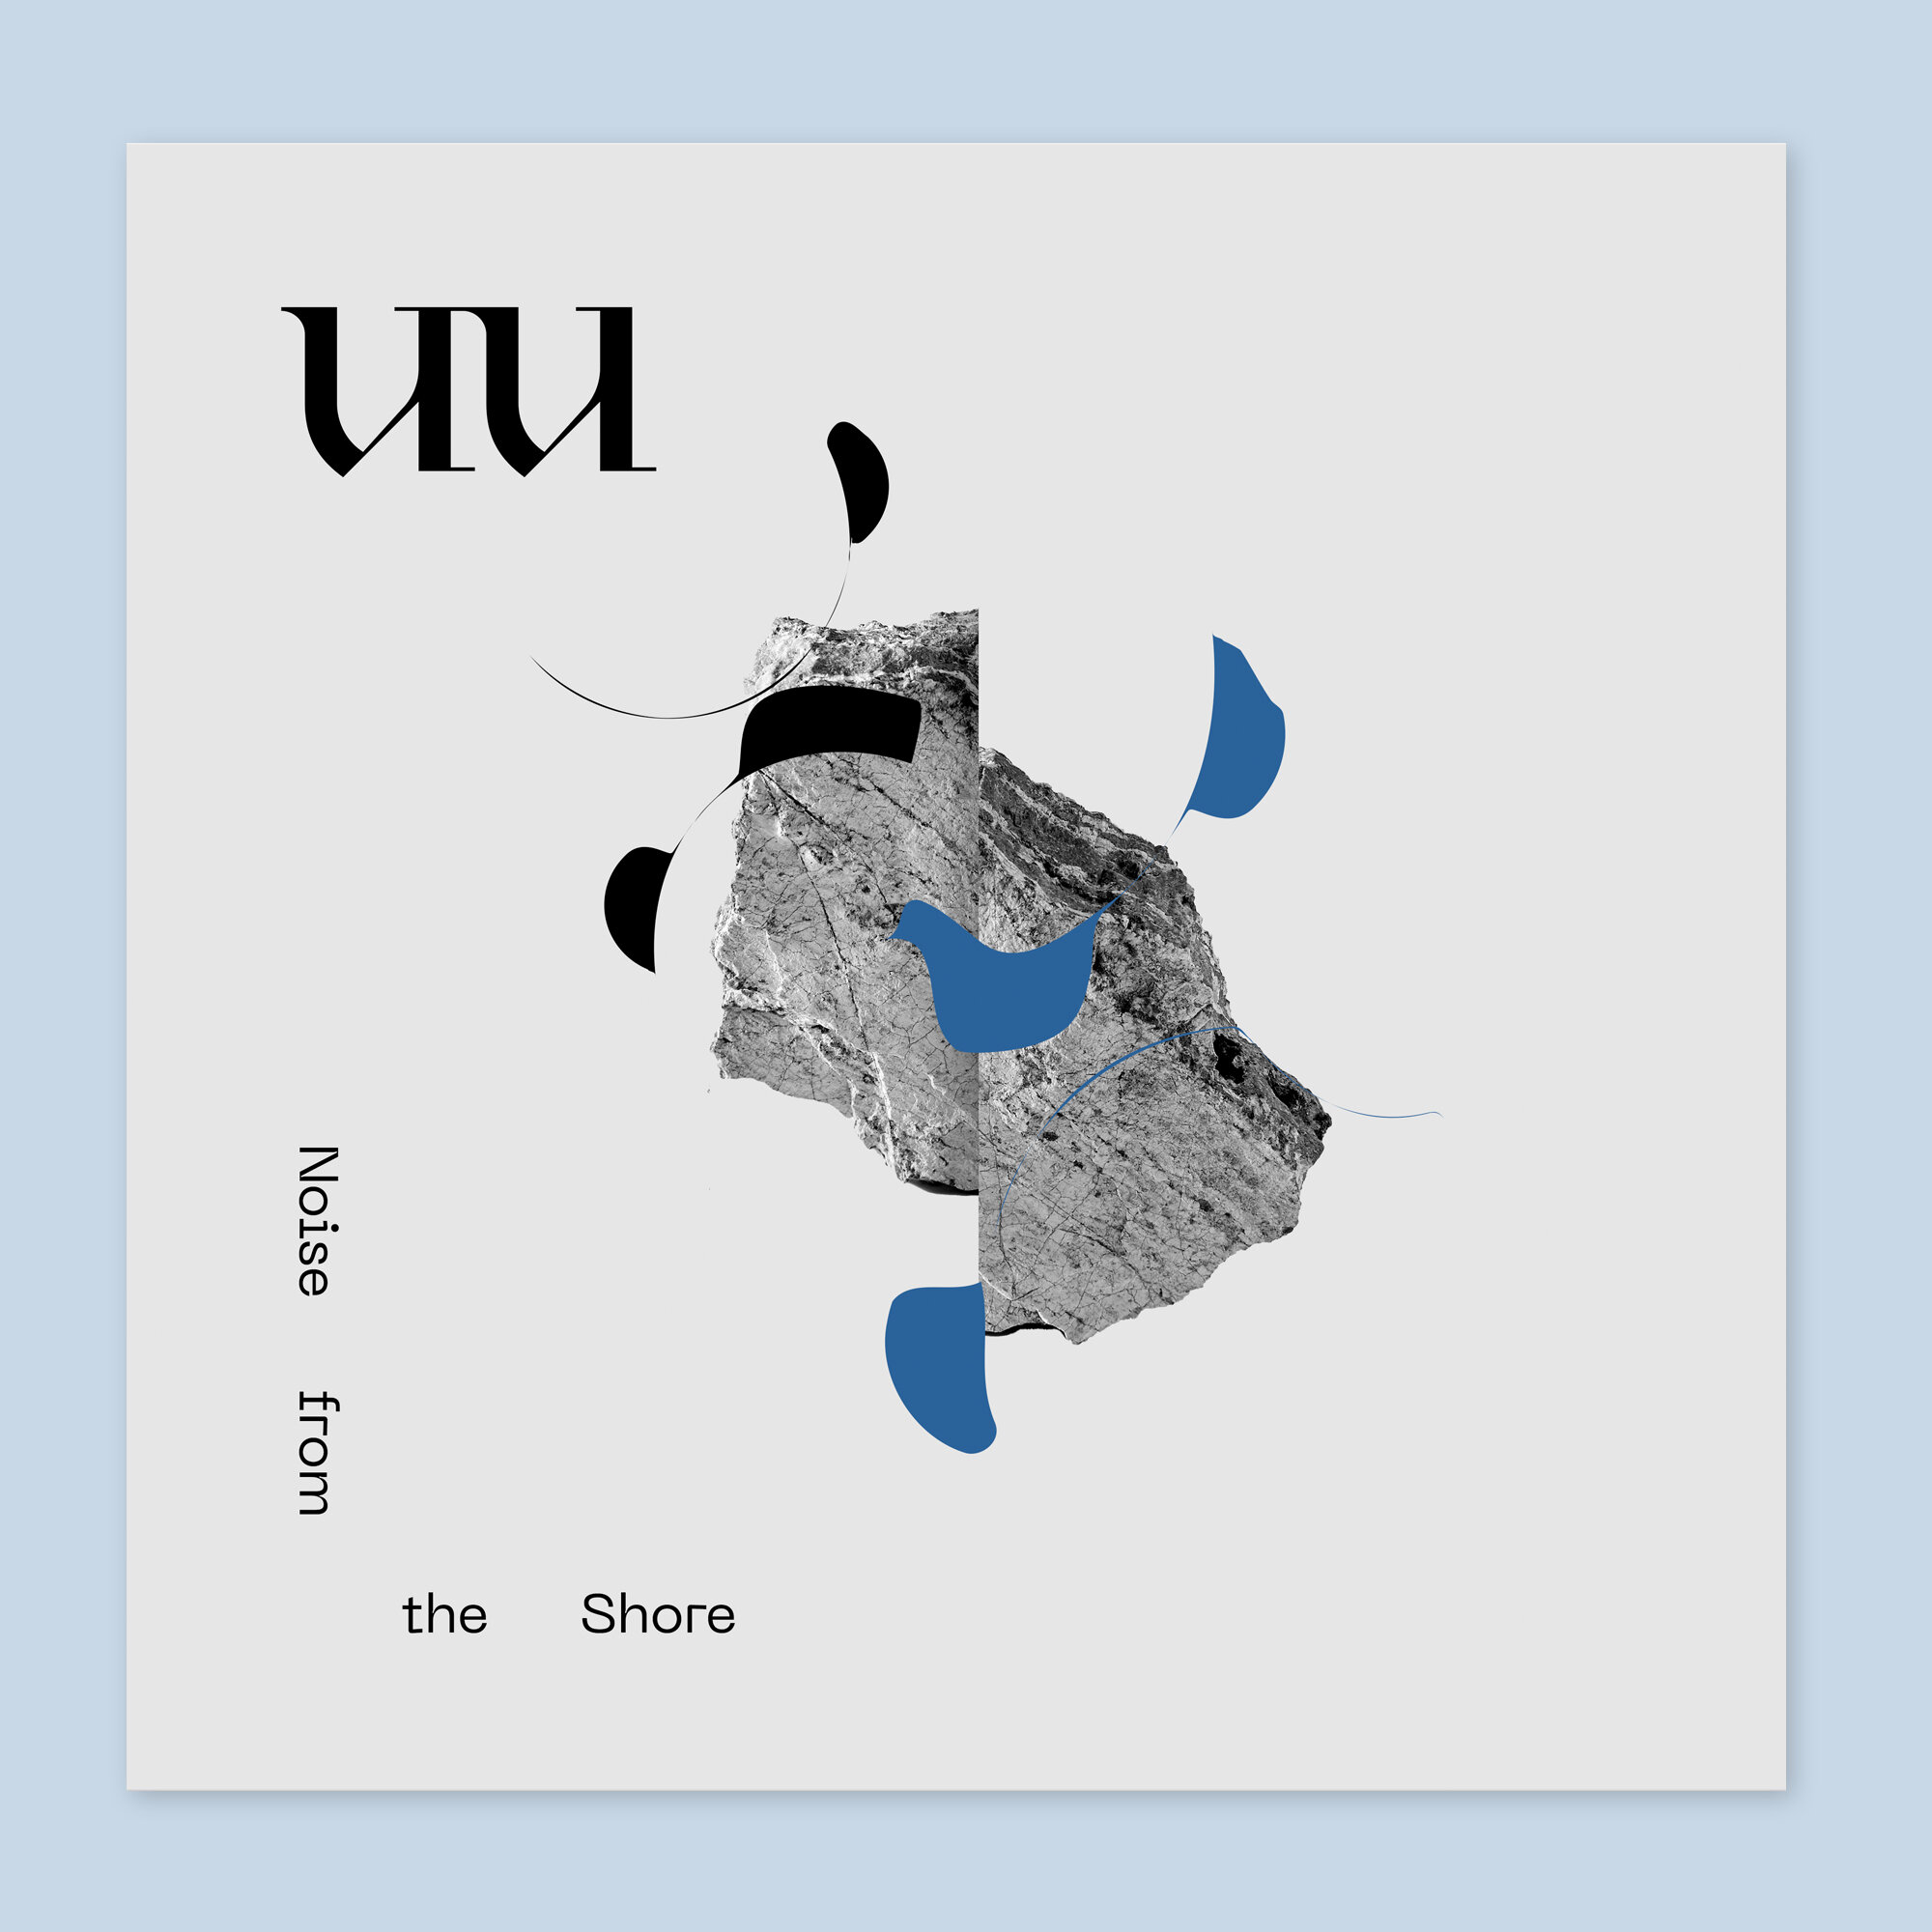 uu - Noise from the Shore — Works of Mika Mäkinen